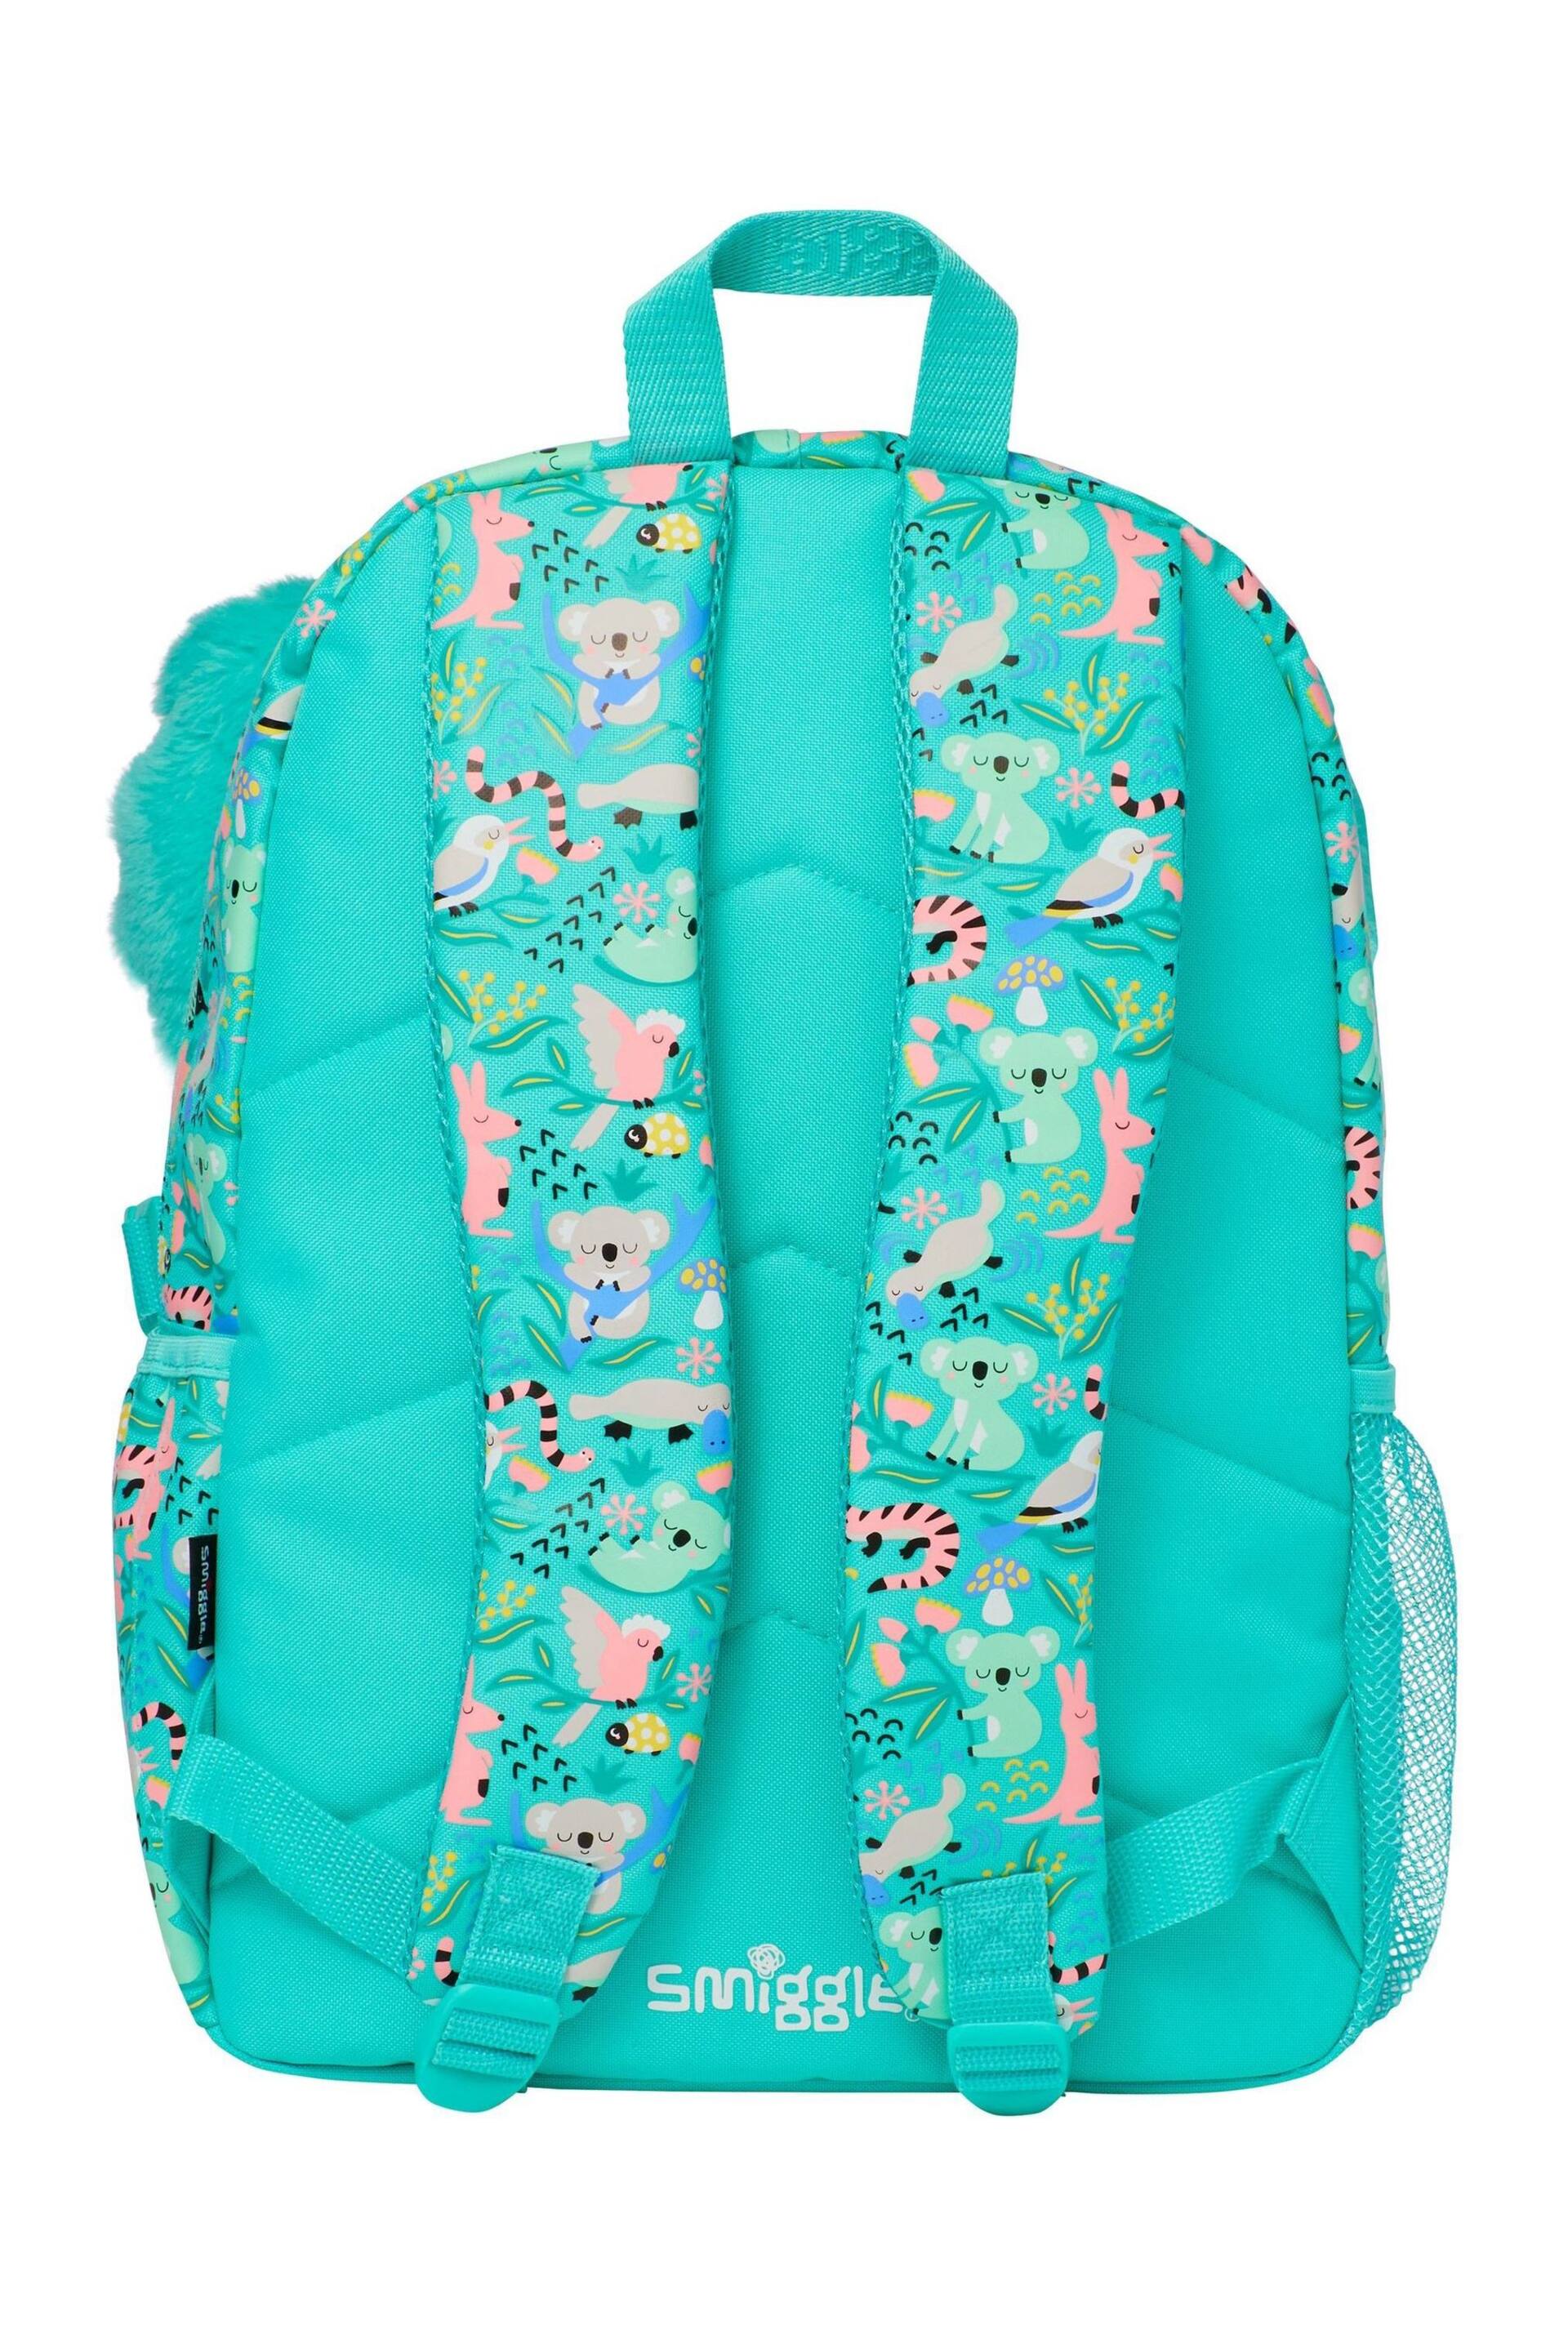 Smiggle Blue Hi There Classic Attach Backpack - Image 4 of 5